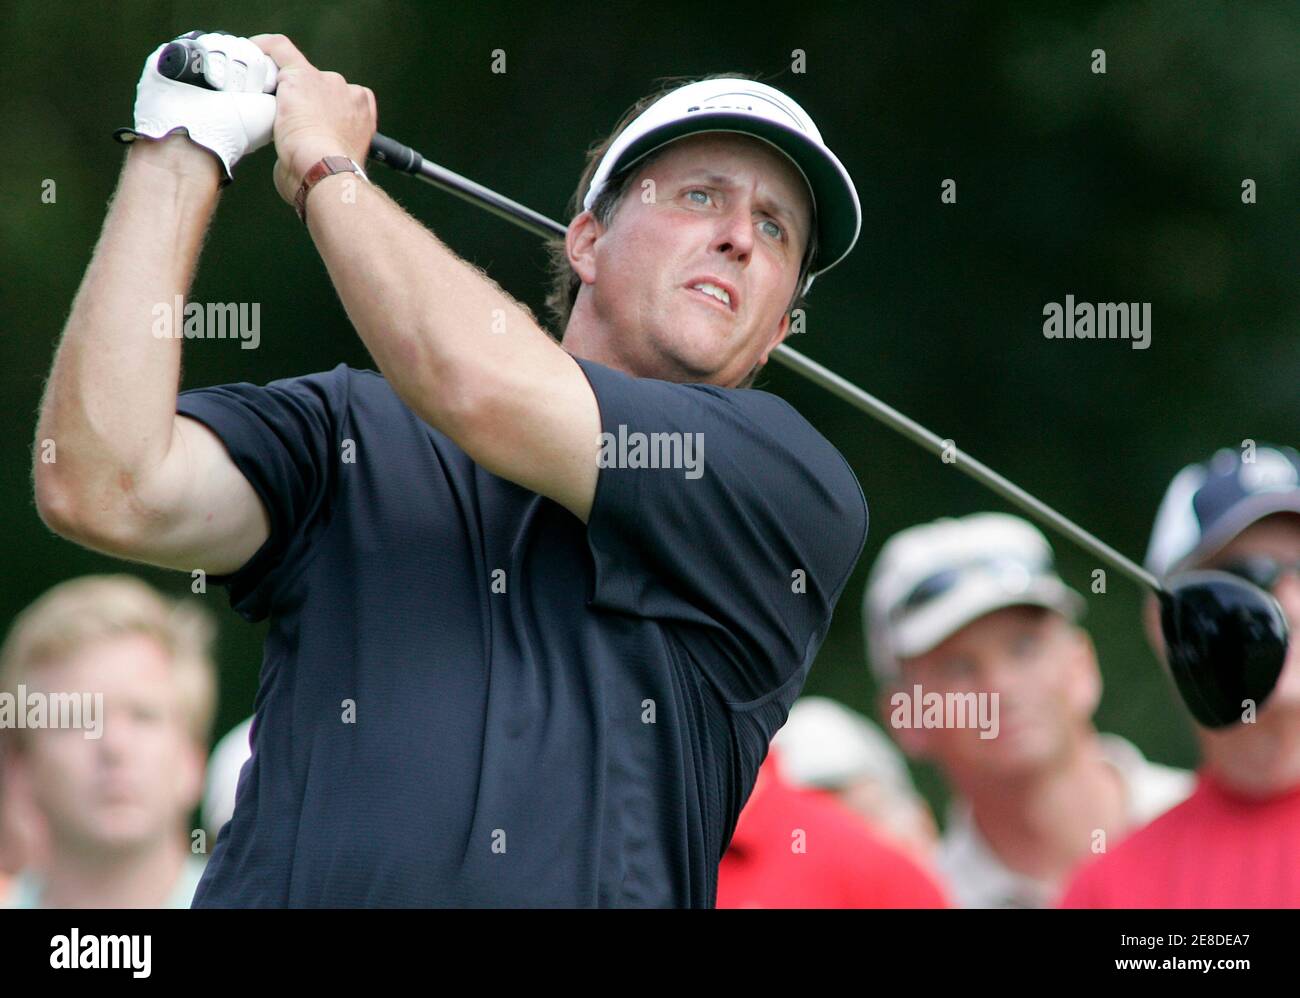 Phil Mickelson of the U.S. tees off on the 15th hole during the final round of The Players Championship golf tournament in Ponte Vedra Beach, Florida, May 13, 2007. Mickelson won the tournament and finished at 11-under-par with a score of 277. REUTERS/Rick Fowler (UNITED STATES) Stock Photo